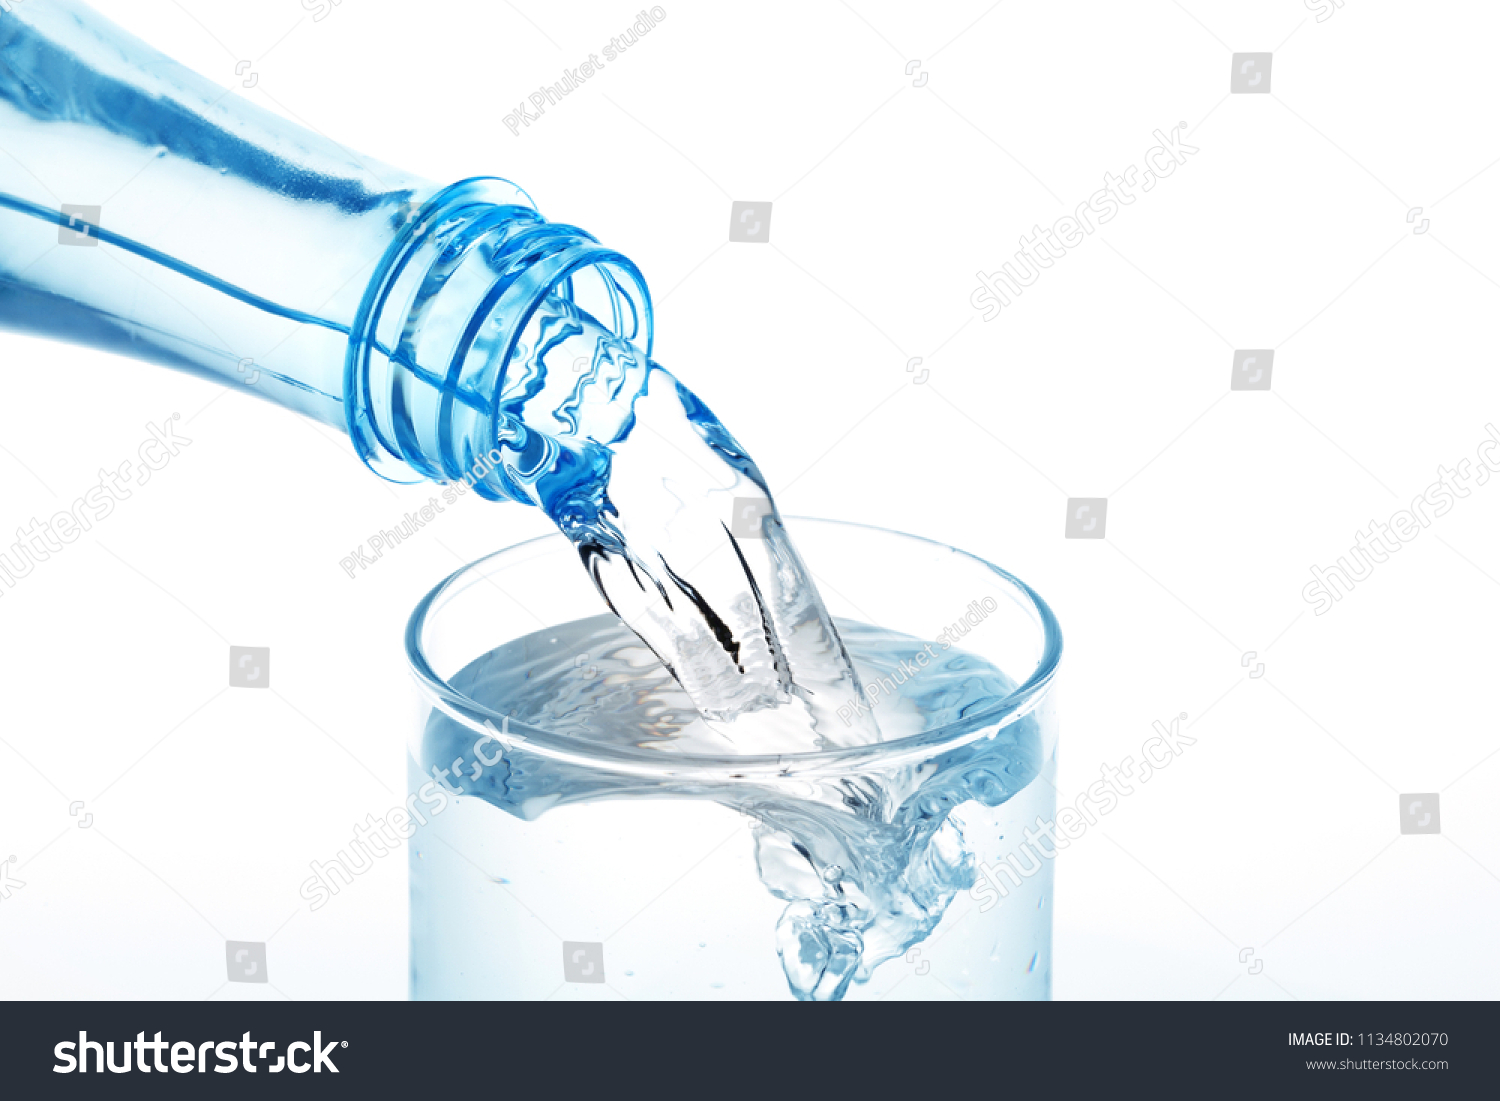 Pouring water from bottle into glass on white background #1134802070